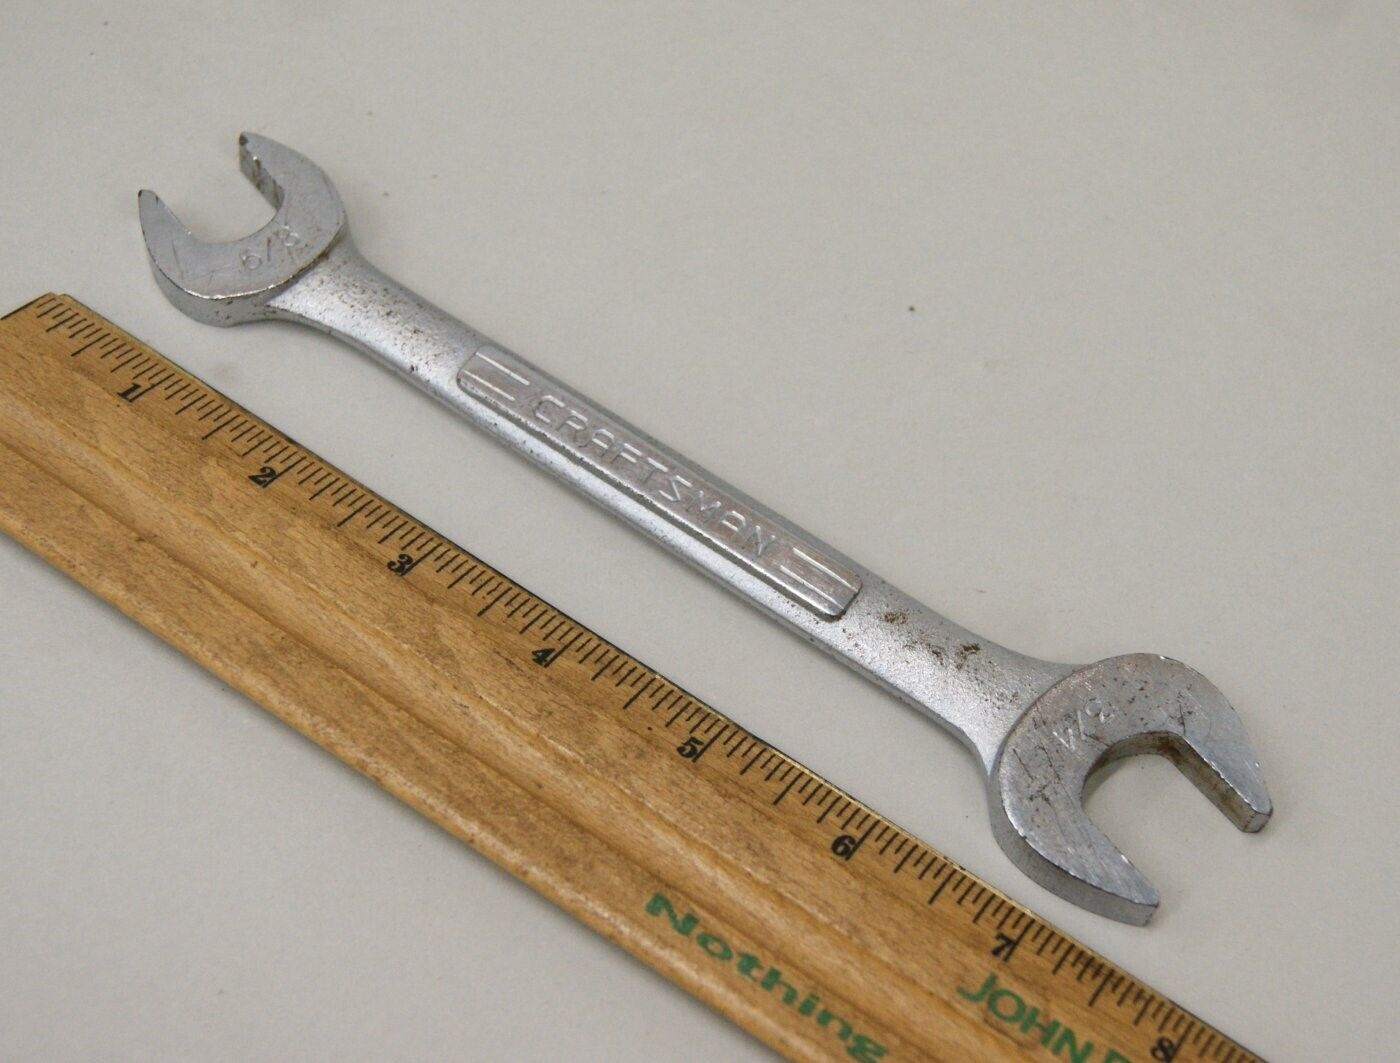 Vintage Craftsman USA Made 5/8” X 3/4” Double Open End Wrench -V- 44582, S-9740